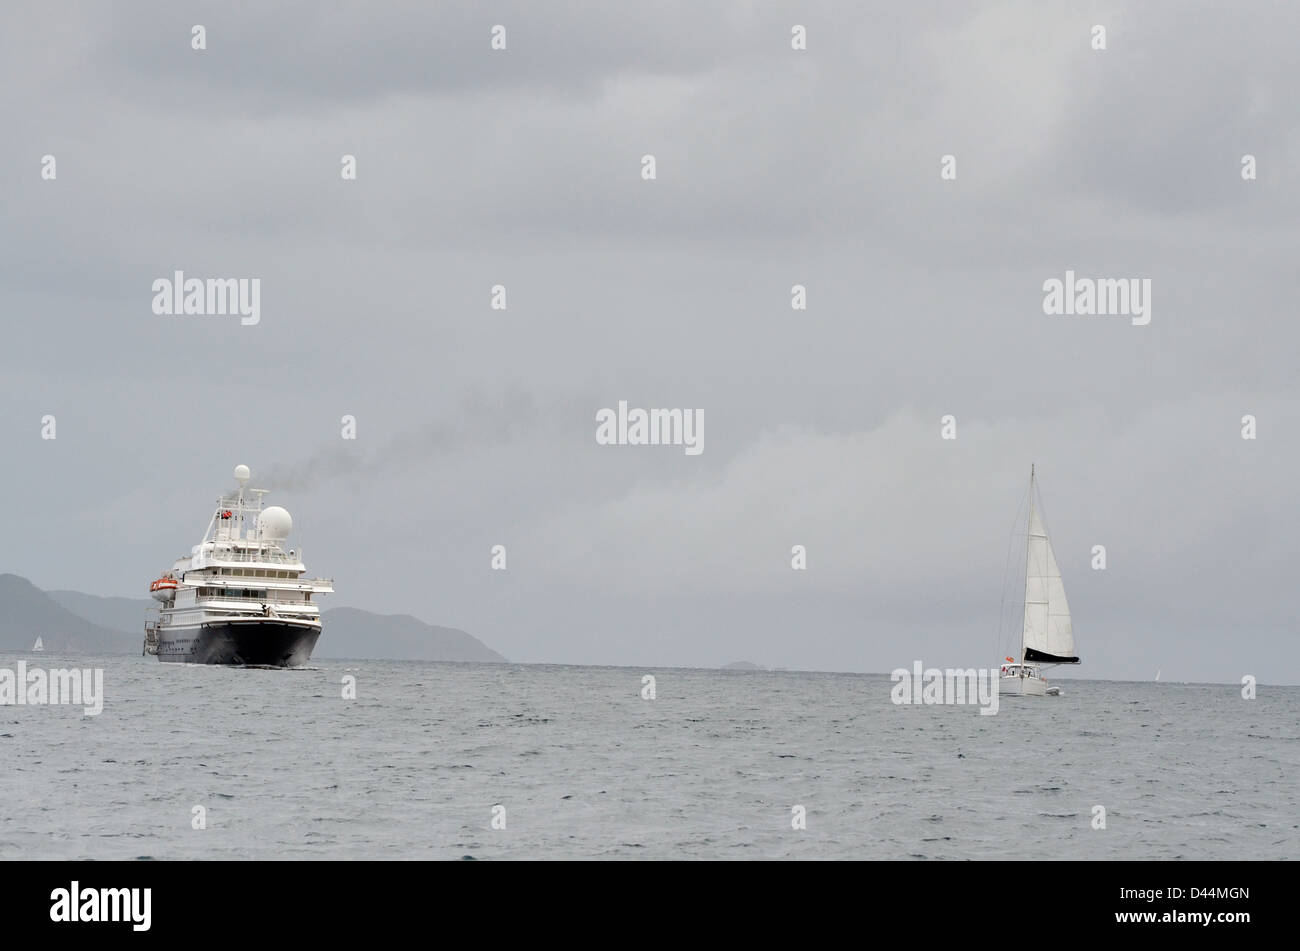 Cruise ship and sailboats in the Virgin Islands. Stock Photo